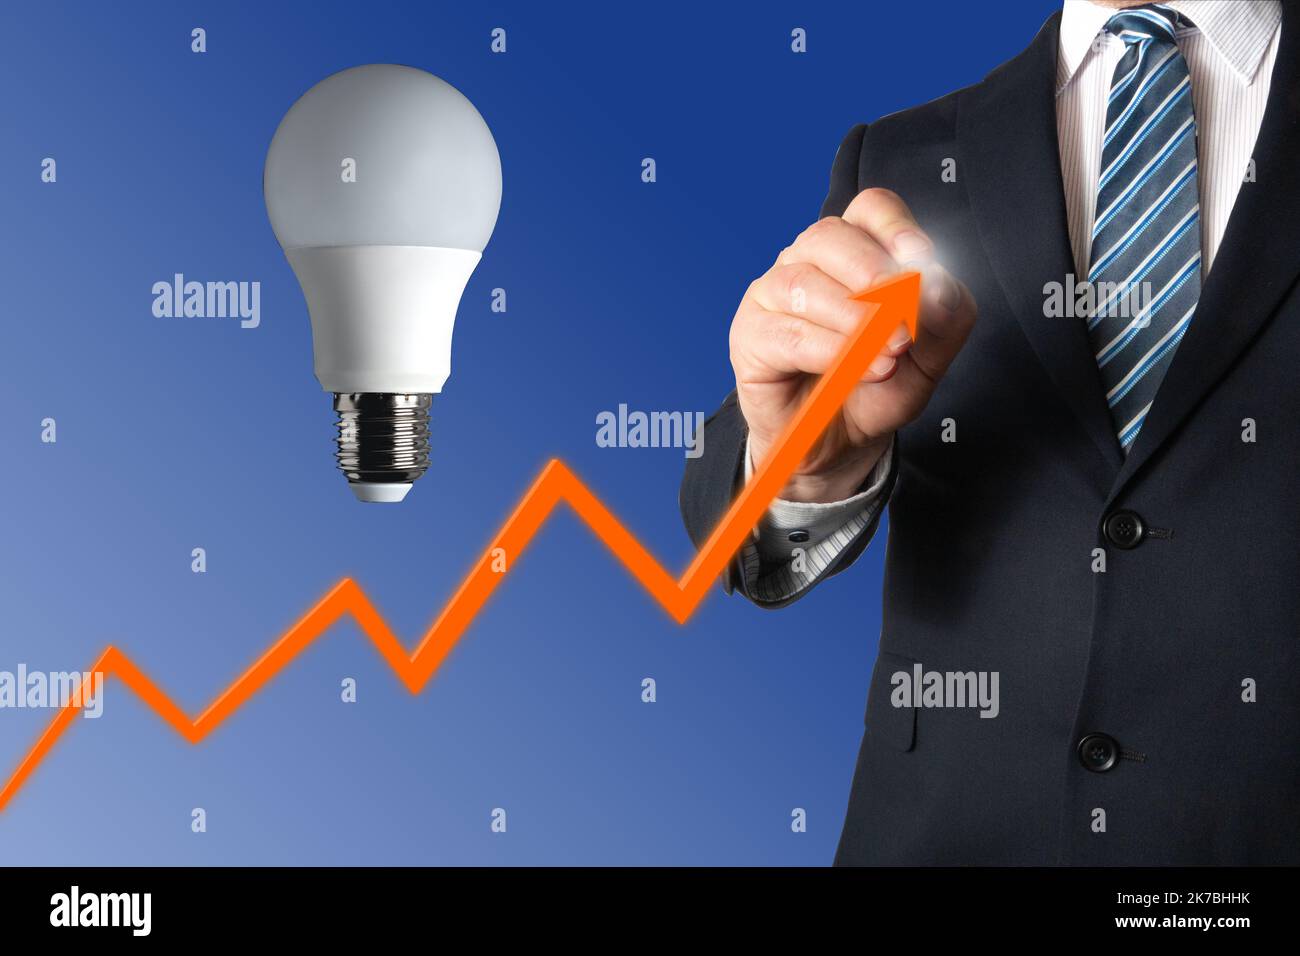 Electricity and power supply prices going up. Energy crisis. Stock Photo